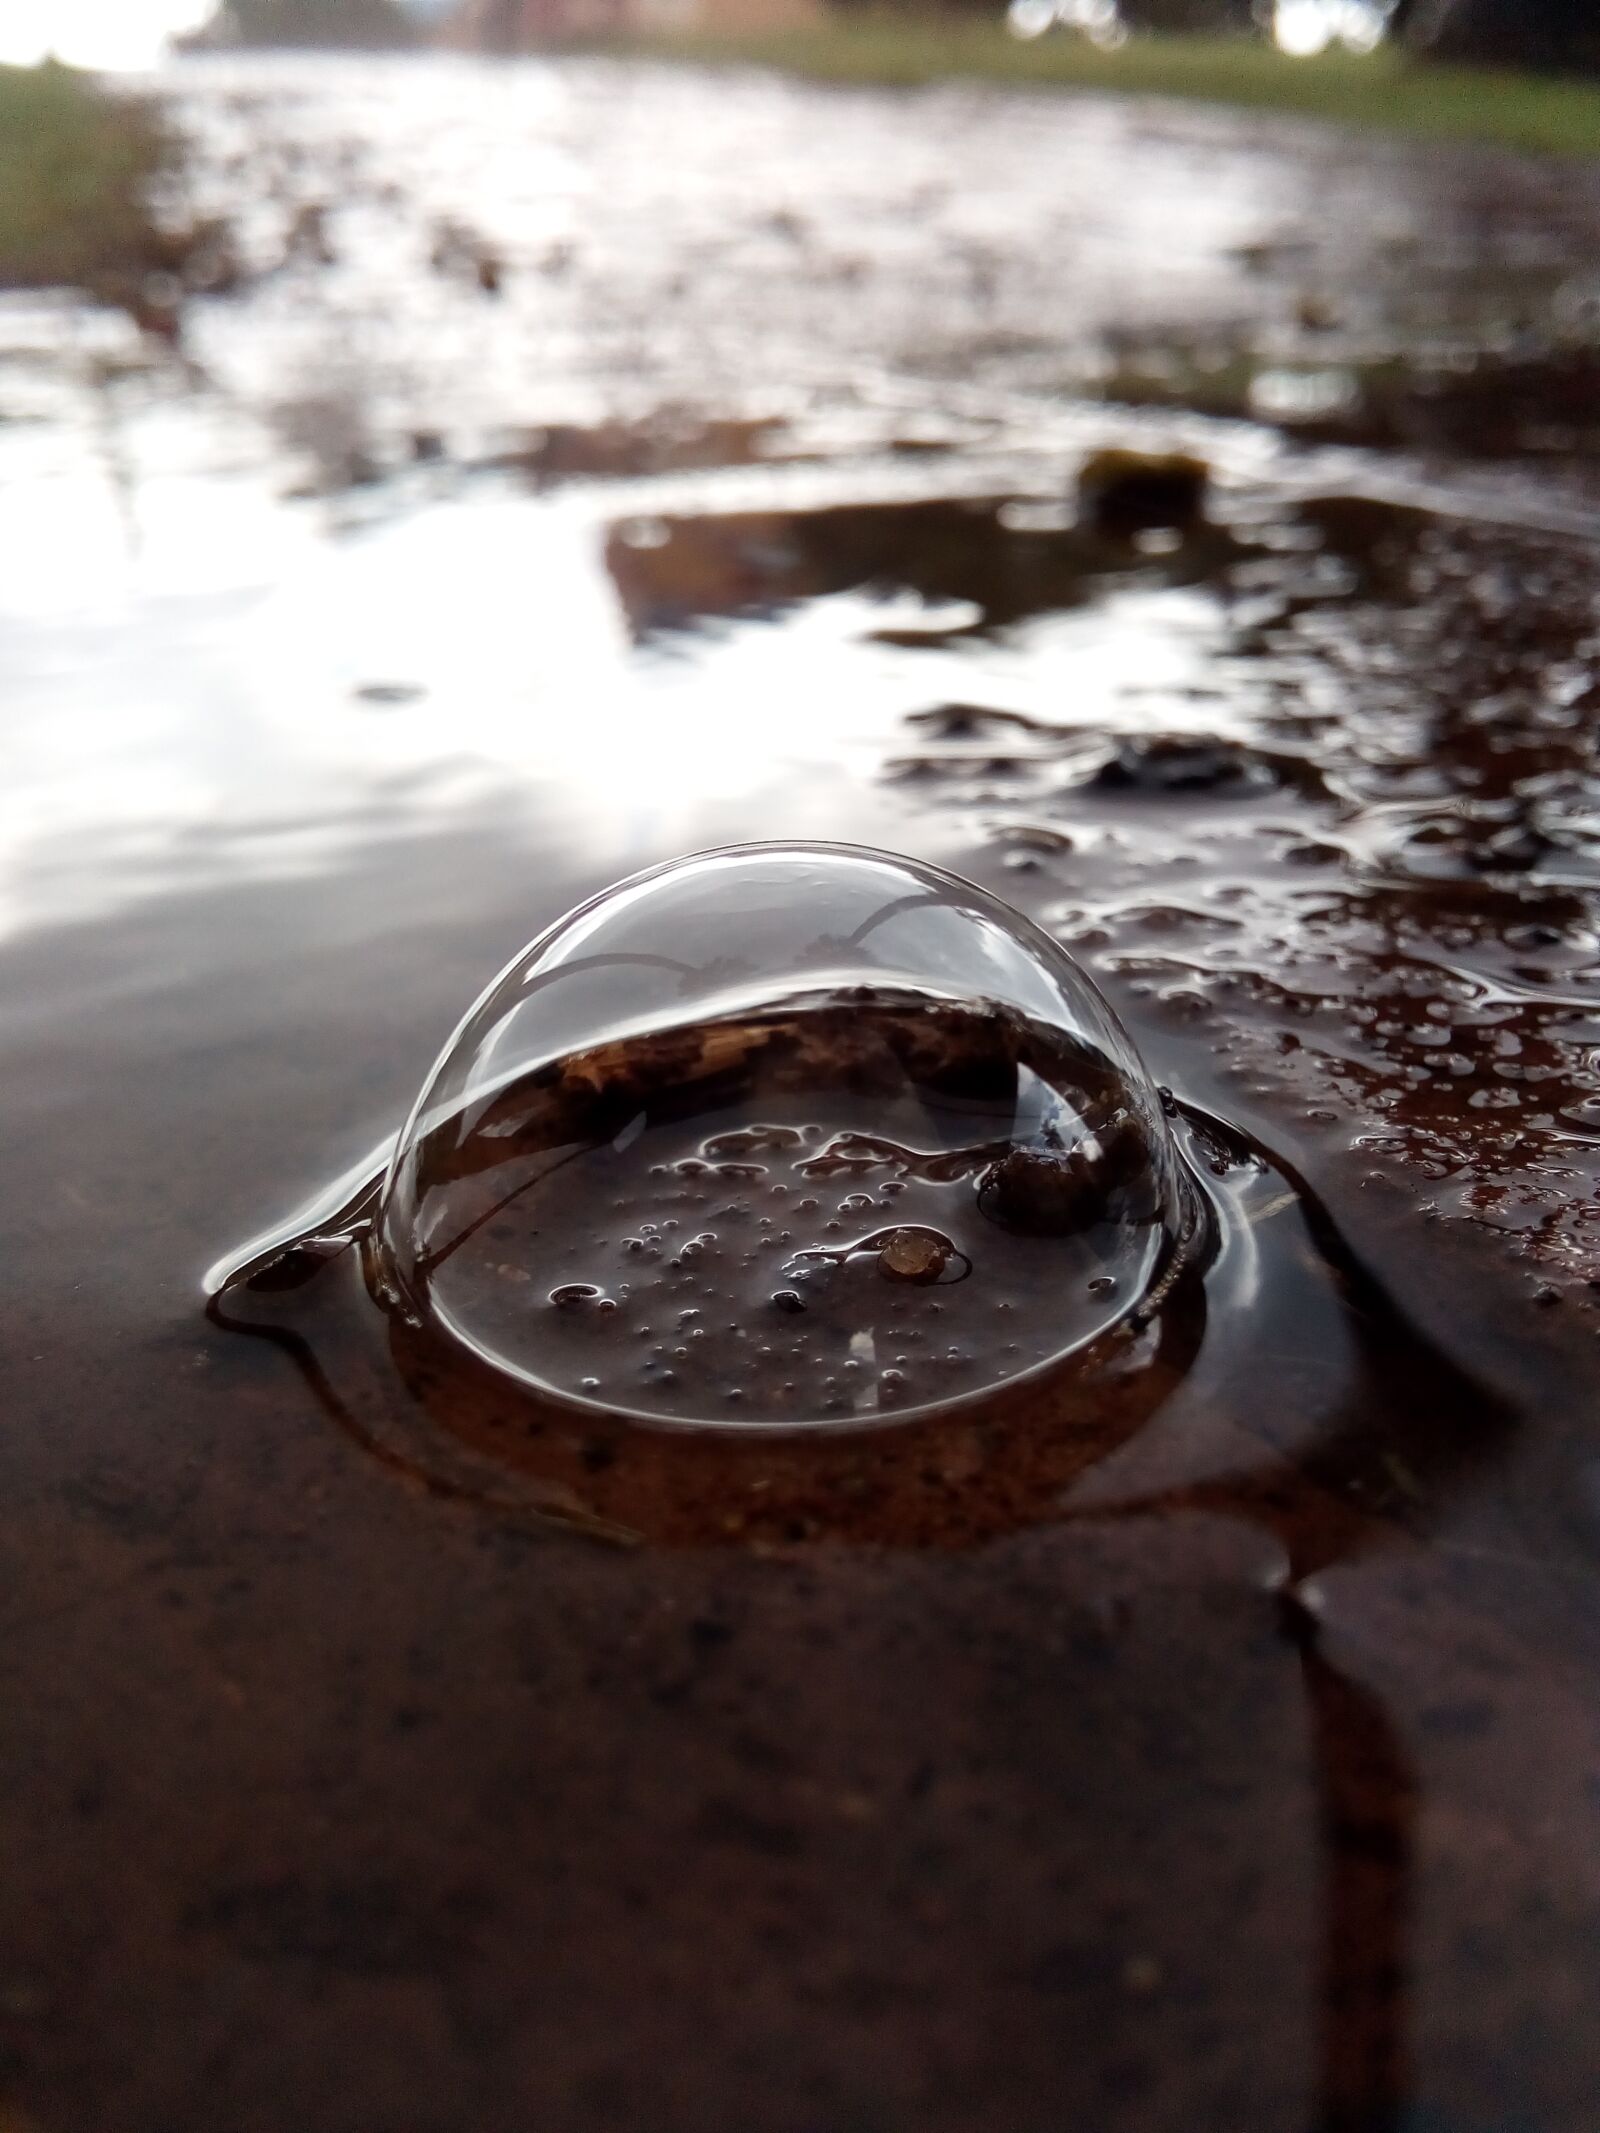 ZTE BLADE A510 sample photo. Water, water bubbles, rain photography